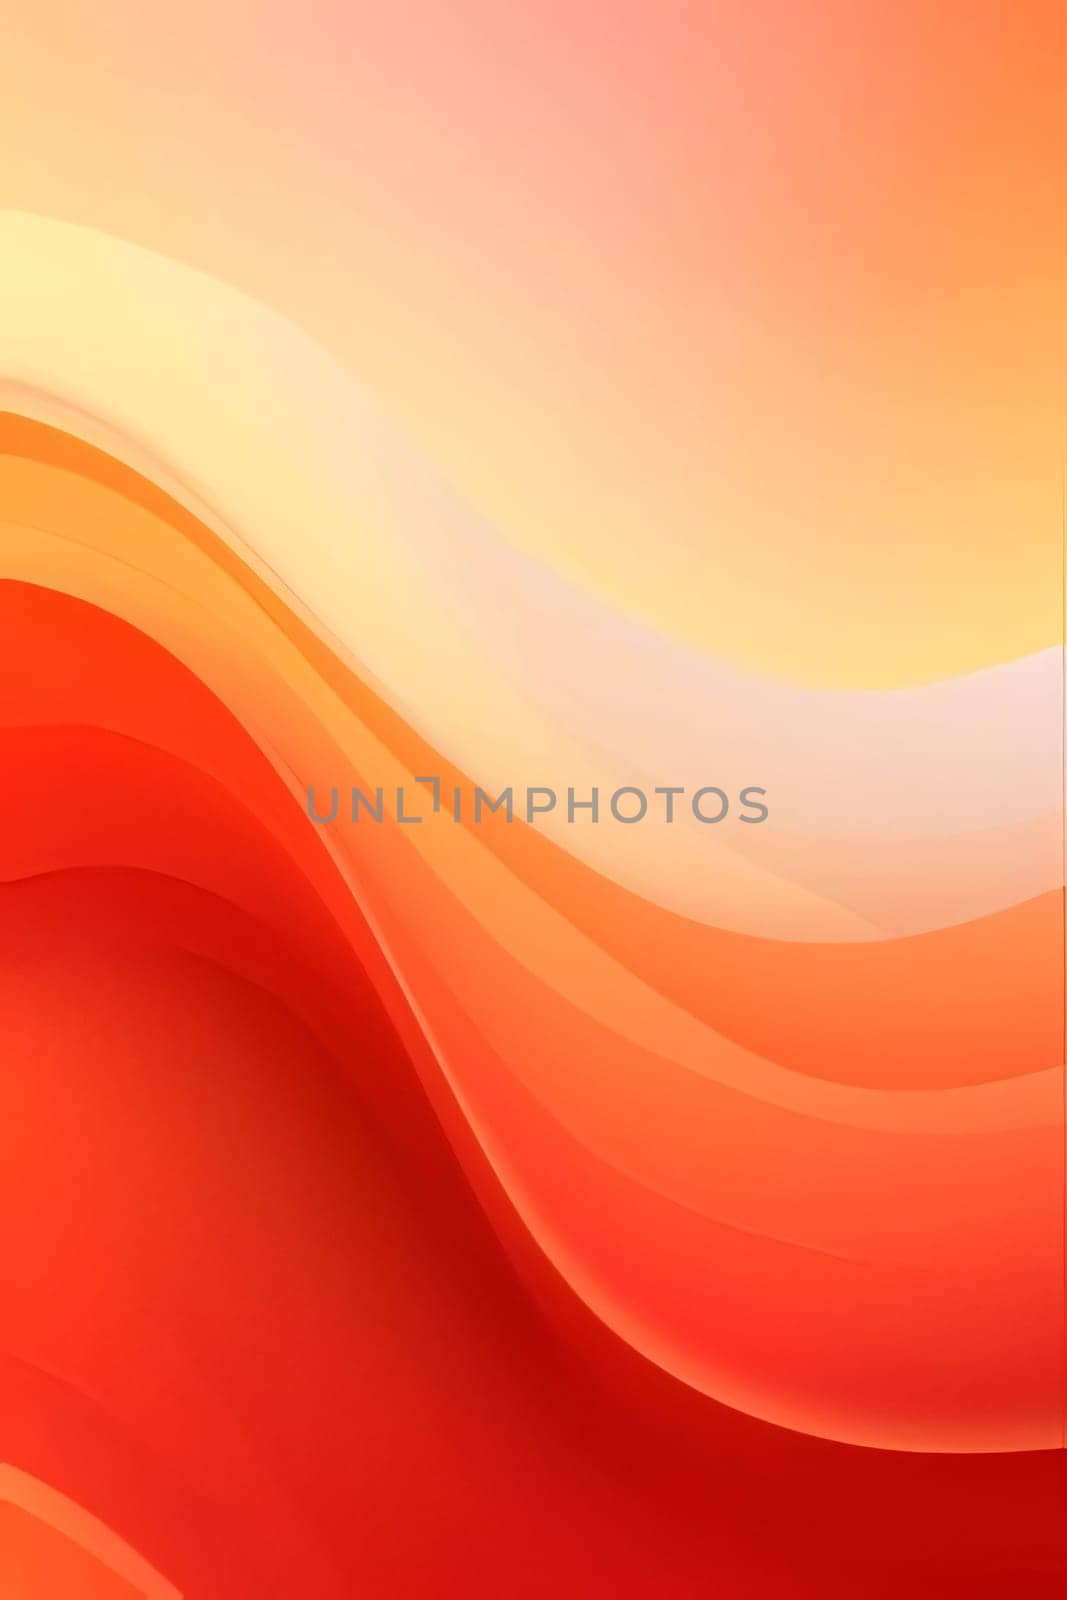 Abstract background design: Abstract orange background with smooth lines. Vector illustration for your design.